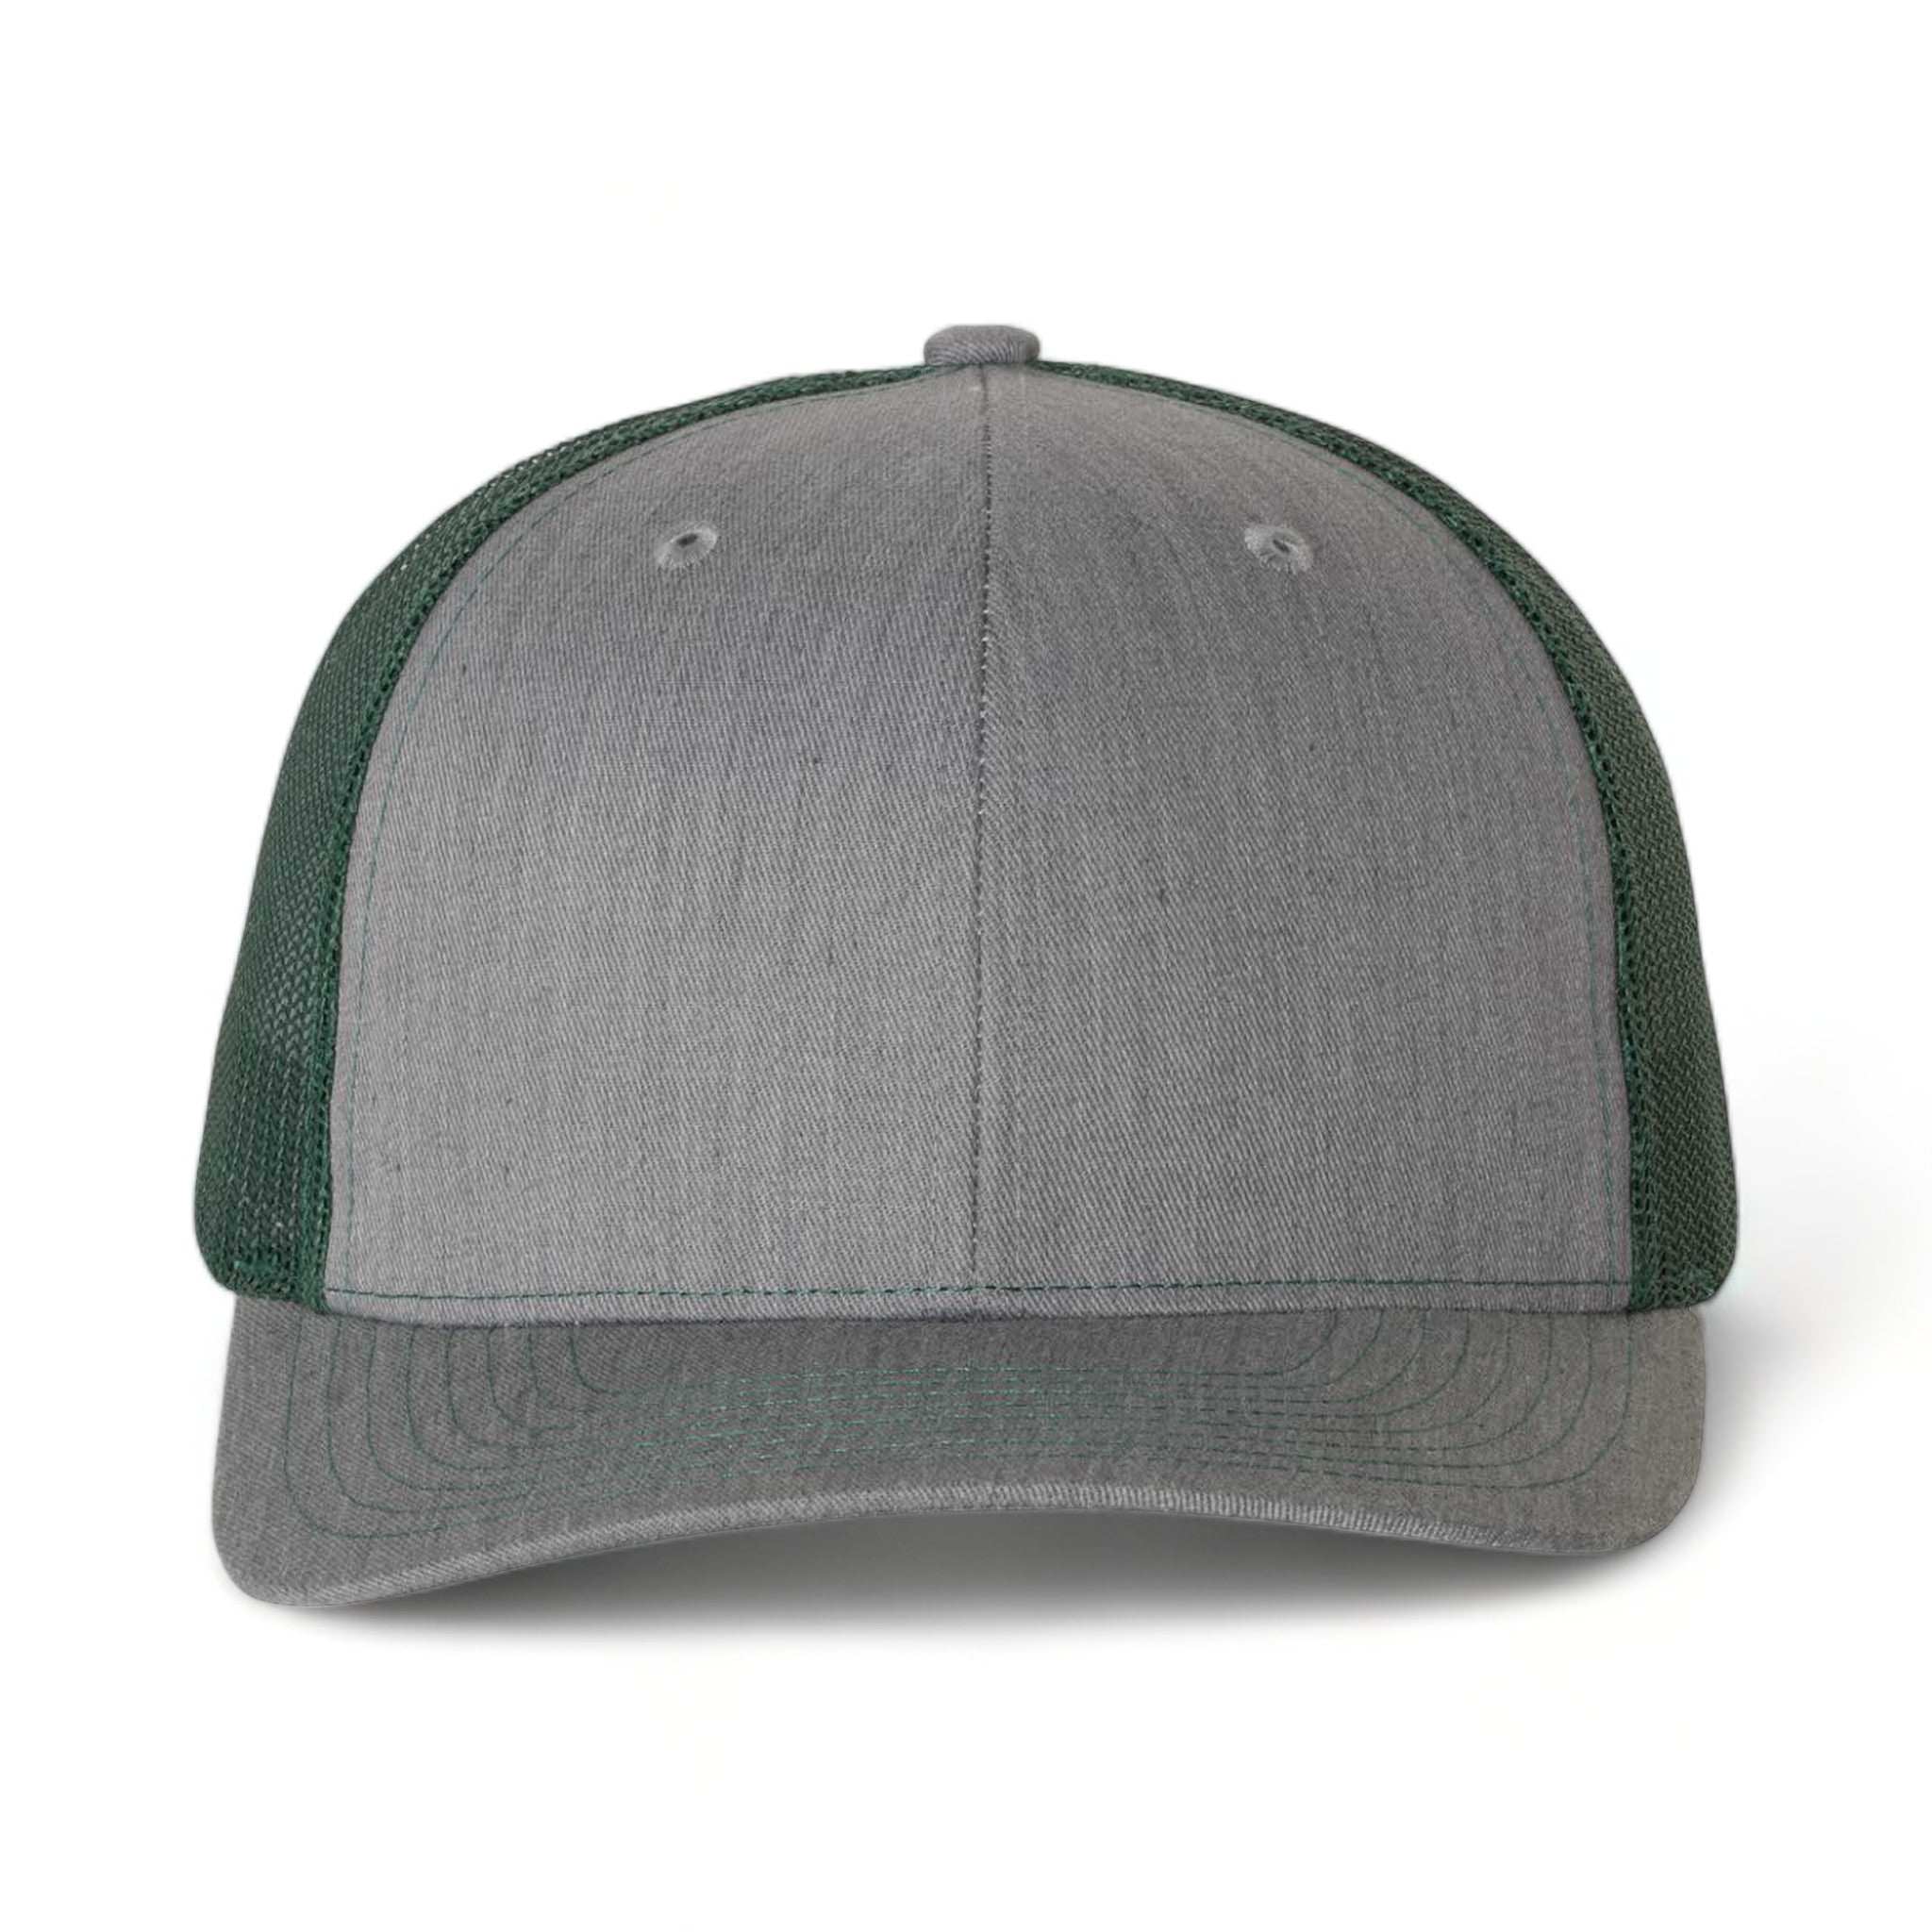 Front view of Richardson 112 custom hat in heather grey and dark green